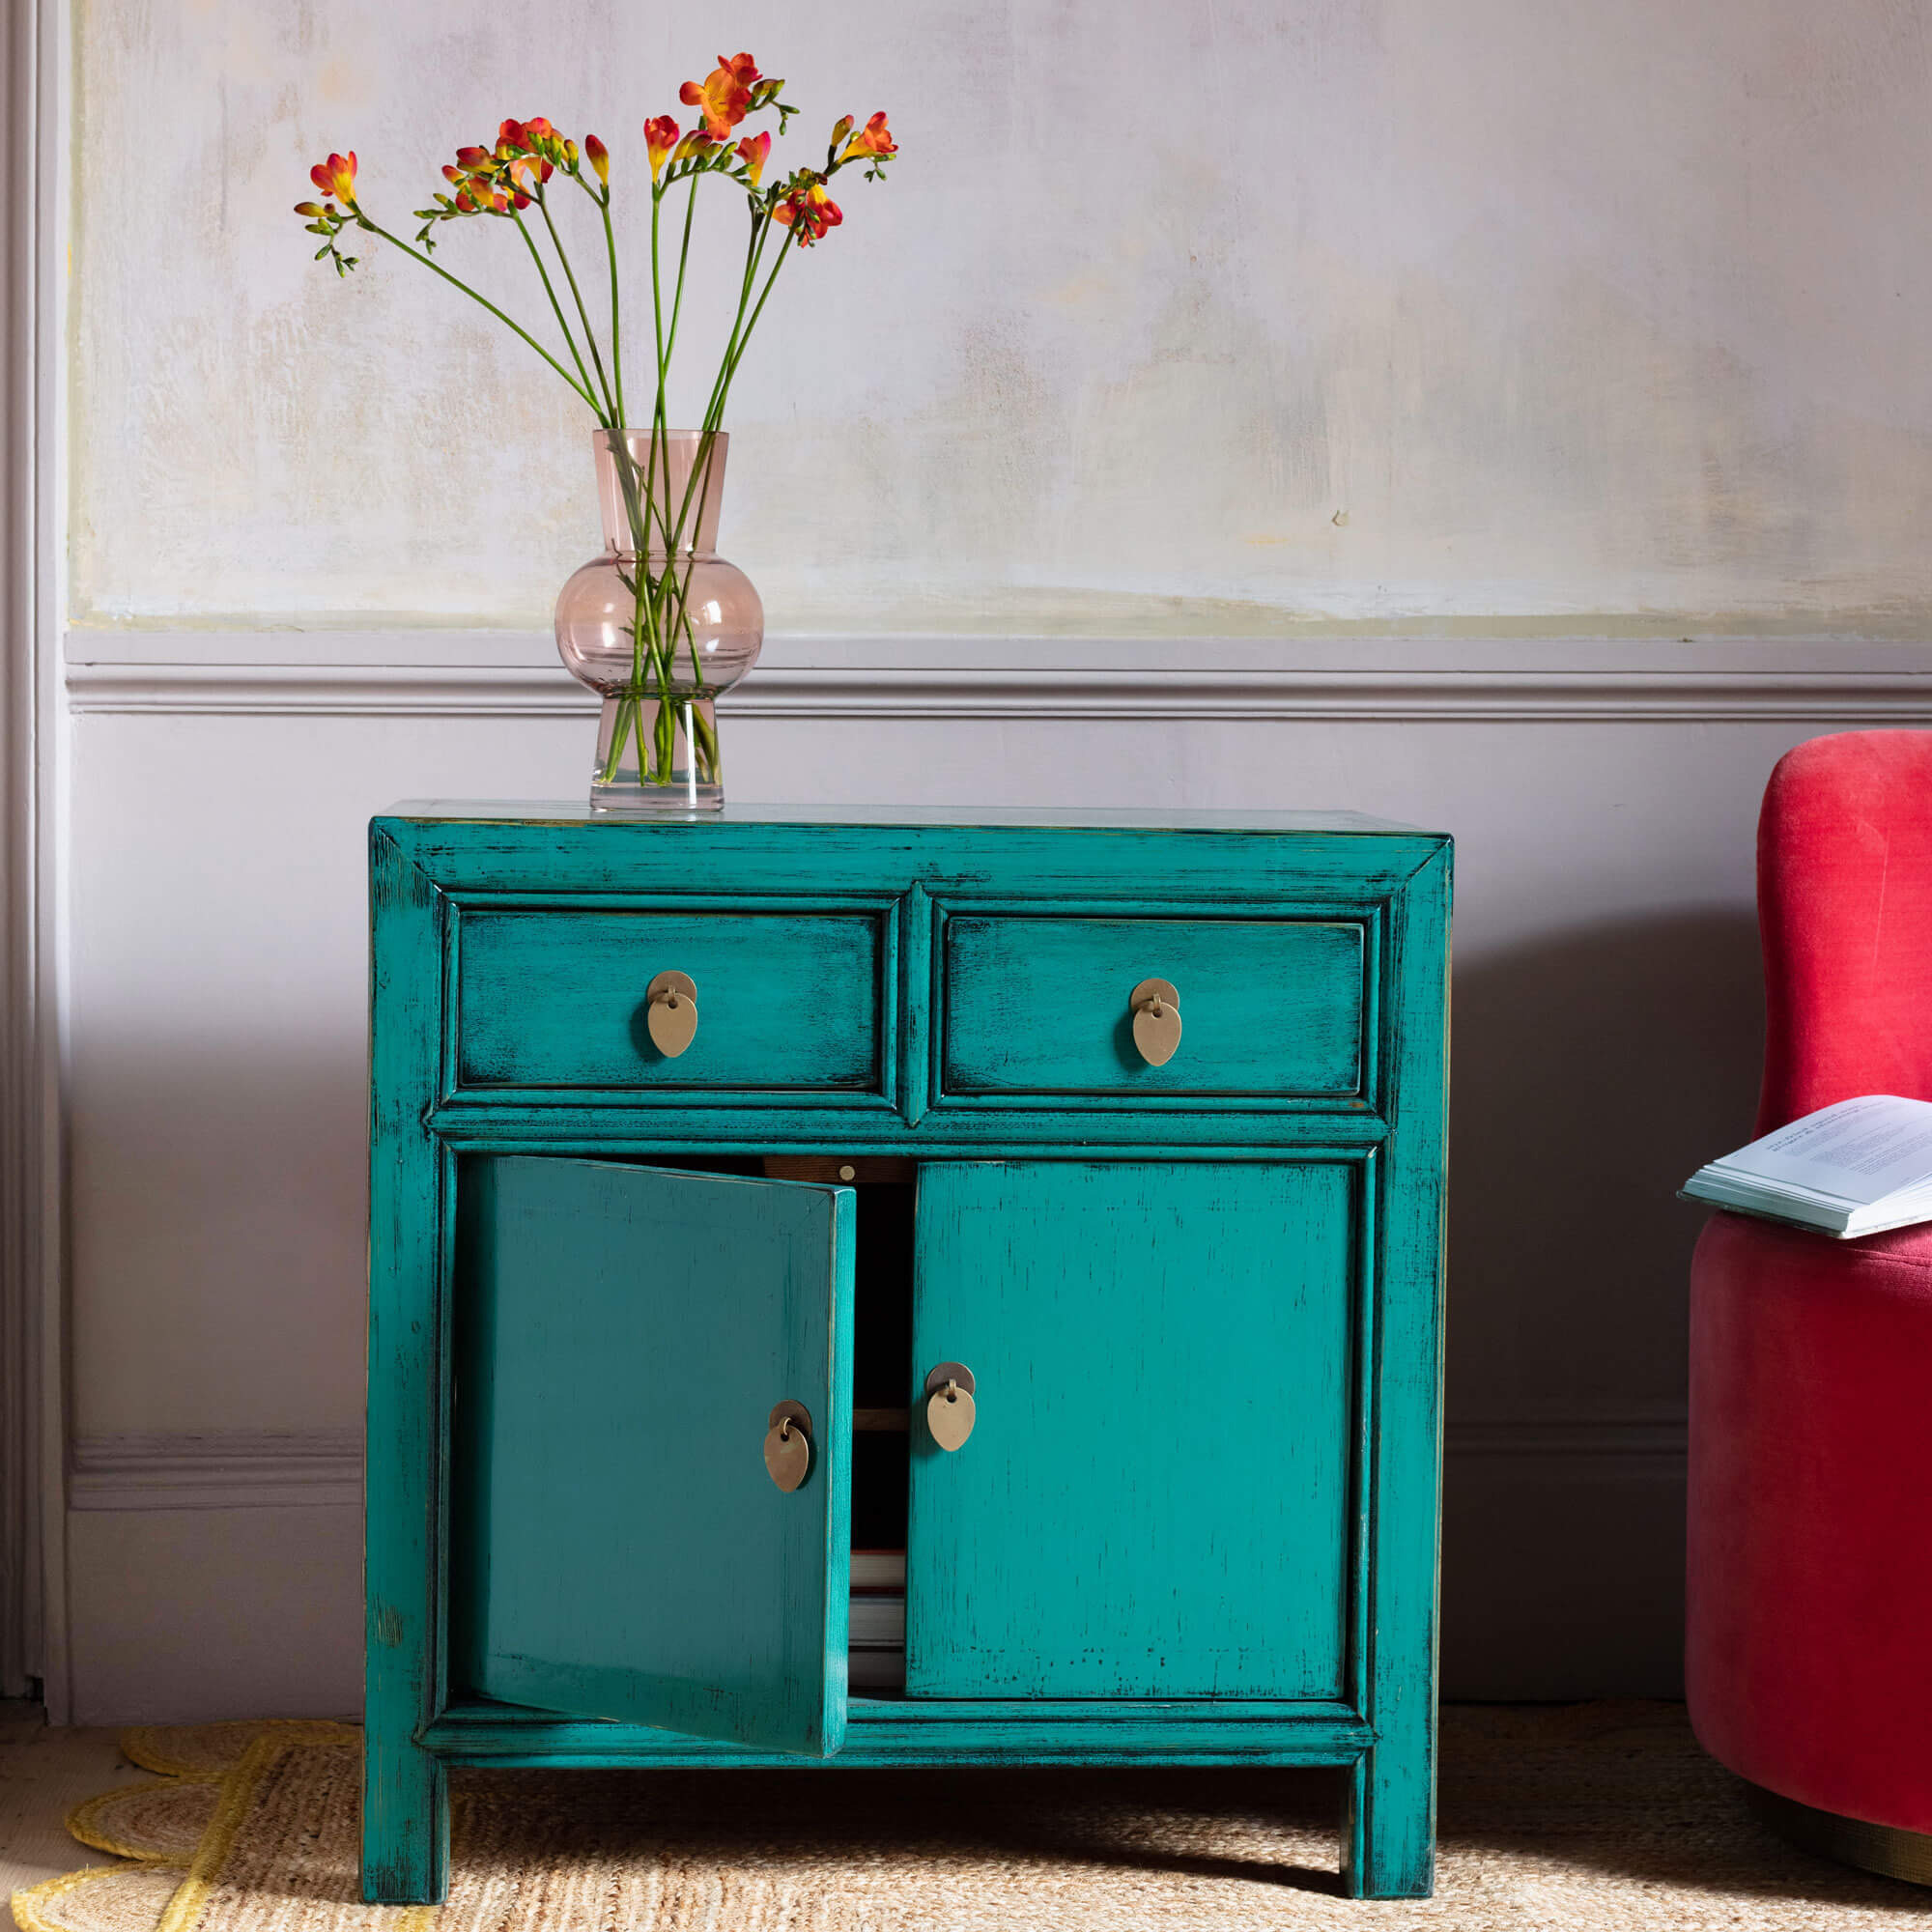 Leshan Peacock Small Two Door Two Drawer Sideboard - image 1